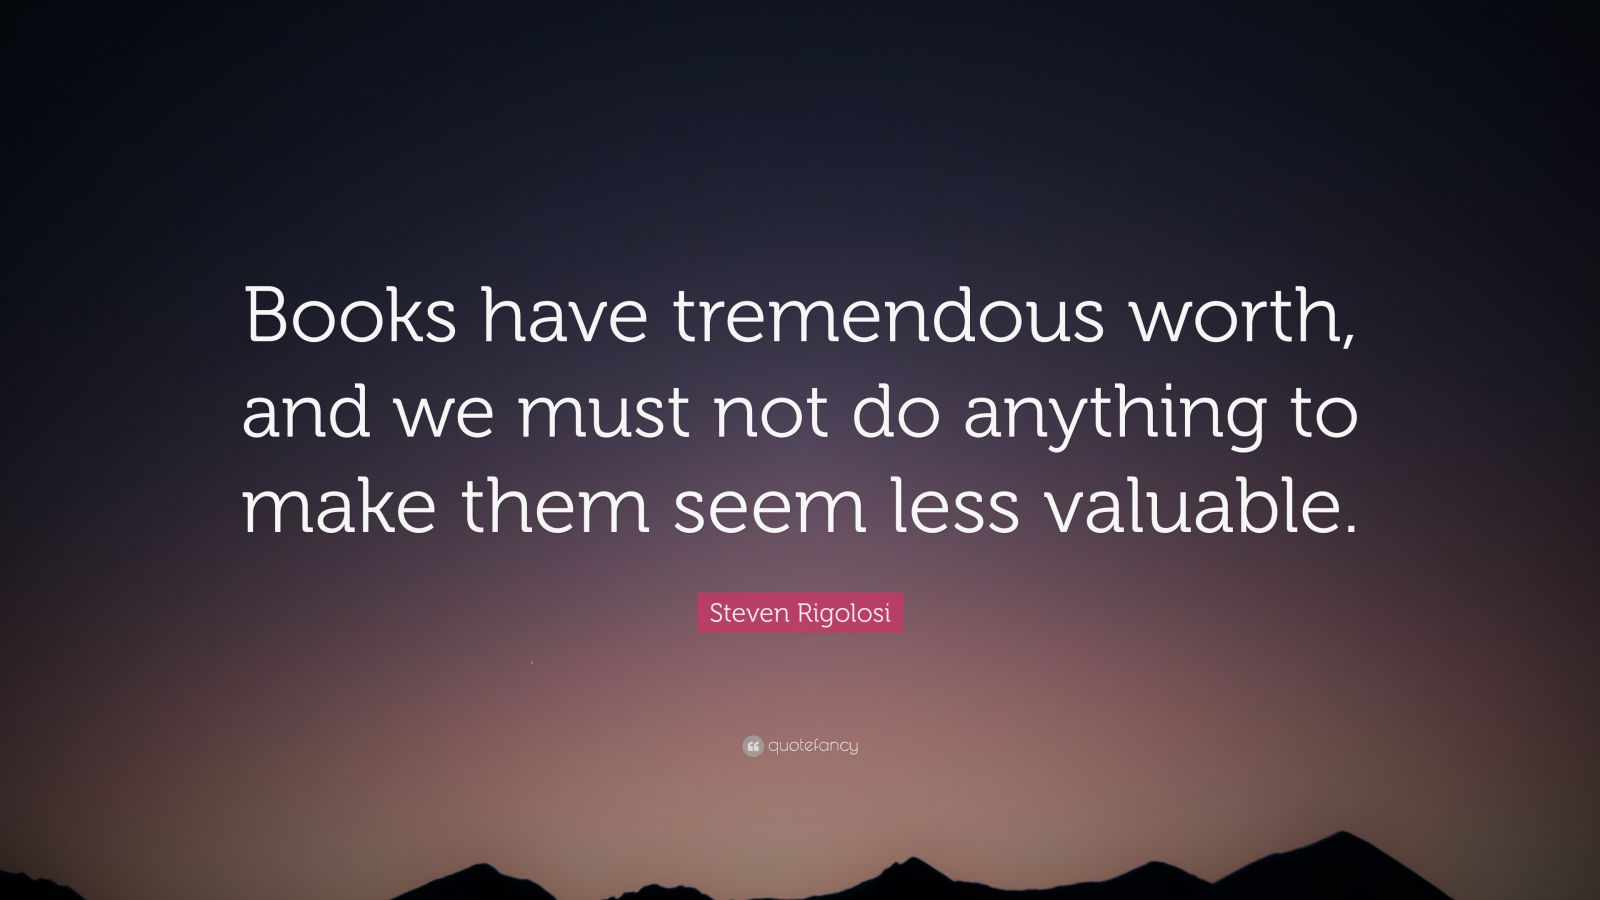 Steven Rigolosi Quote: “Books have tremendous worth, and we must not do ...